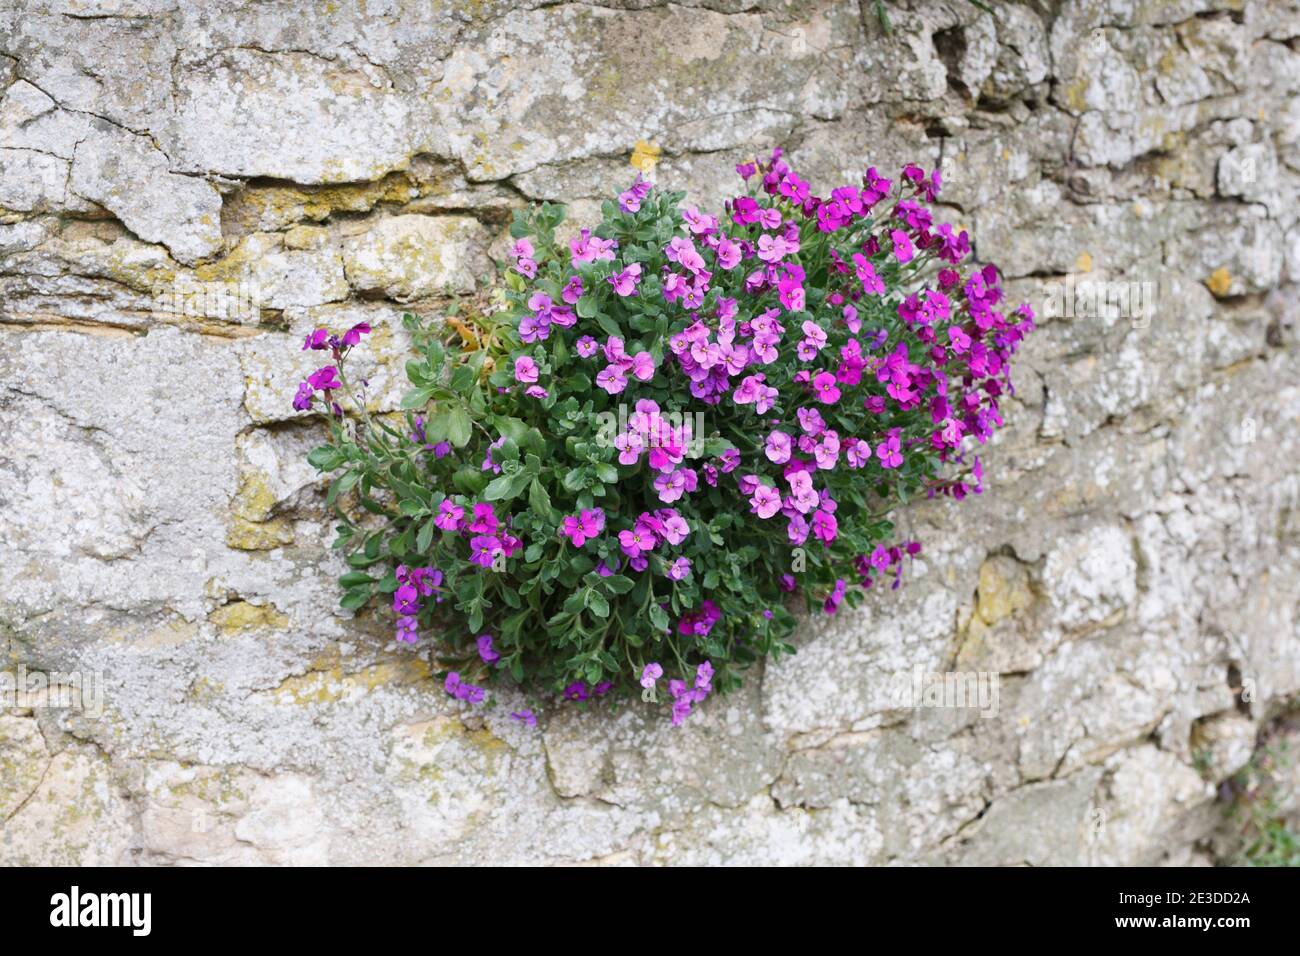 Aubretia flowers growing in a stone wall in Spring. Stock Photo